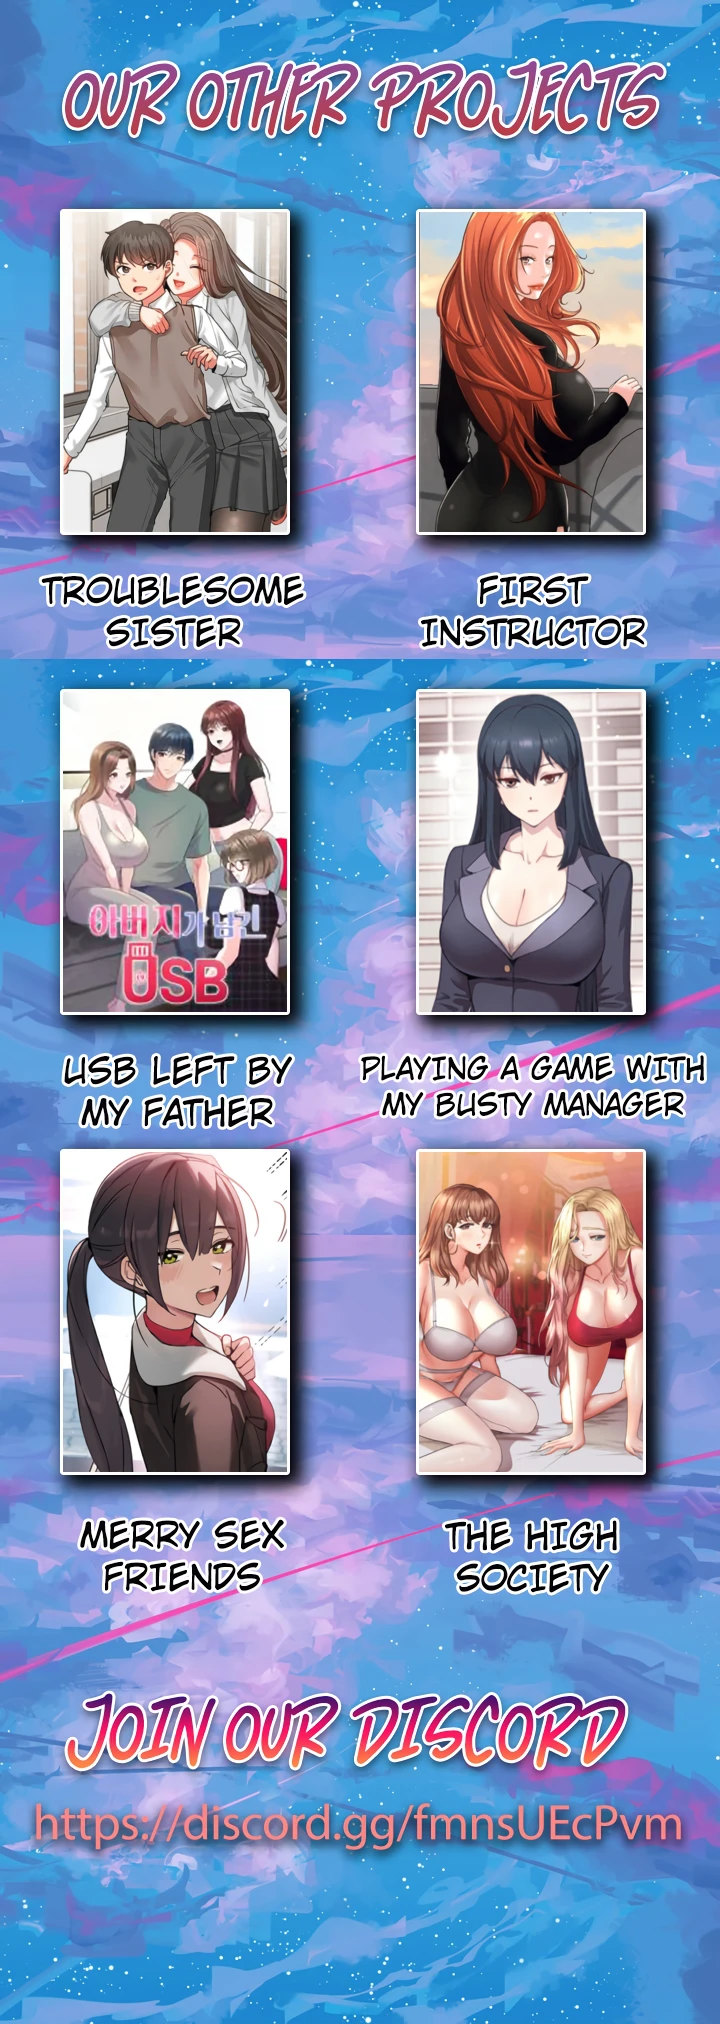 Playing a game with my Busty Manager Chapter 12 - Page 10